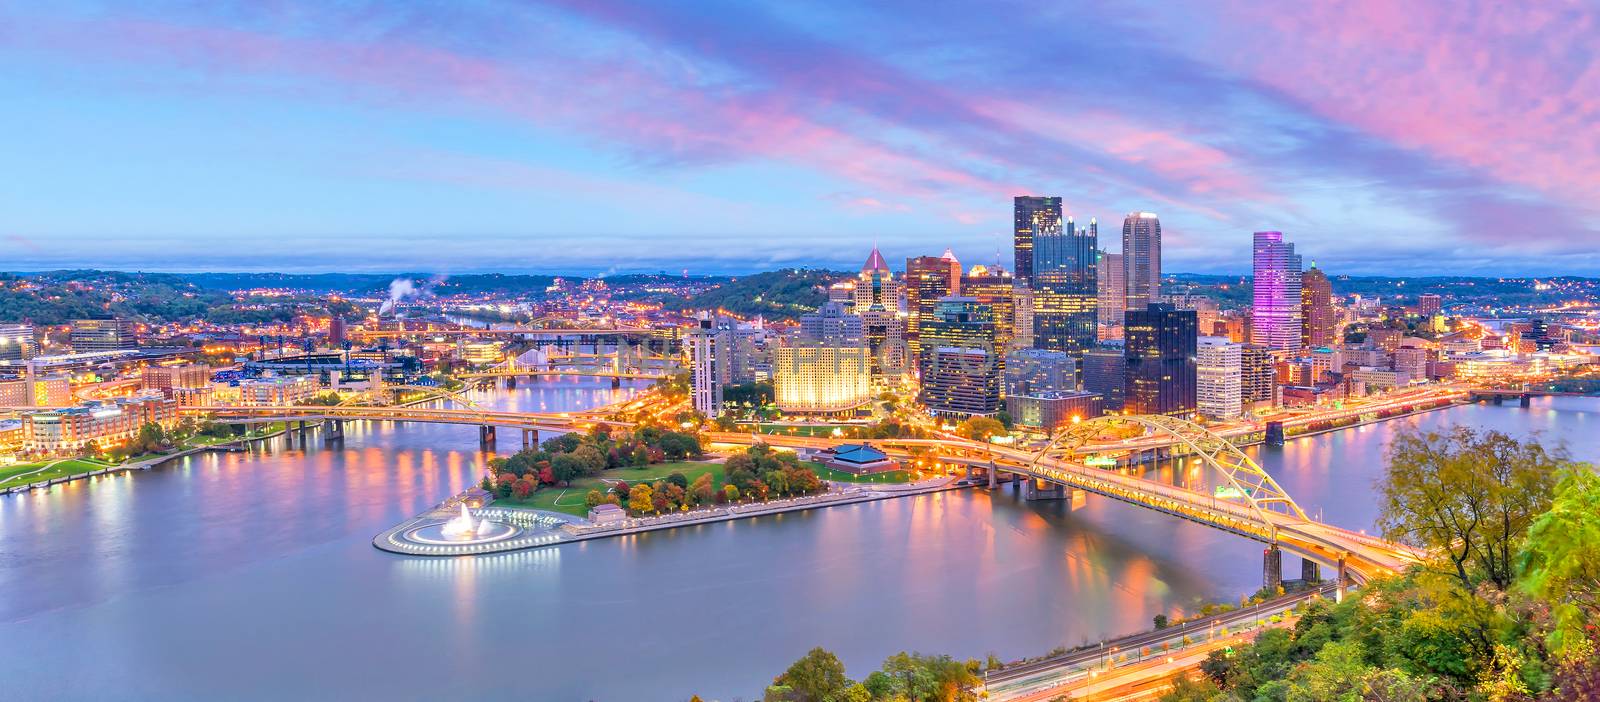 Downtown skyline of Pittsburgh, Pennsylvania at sunset by f11photo